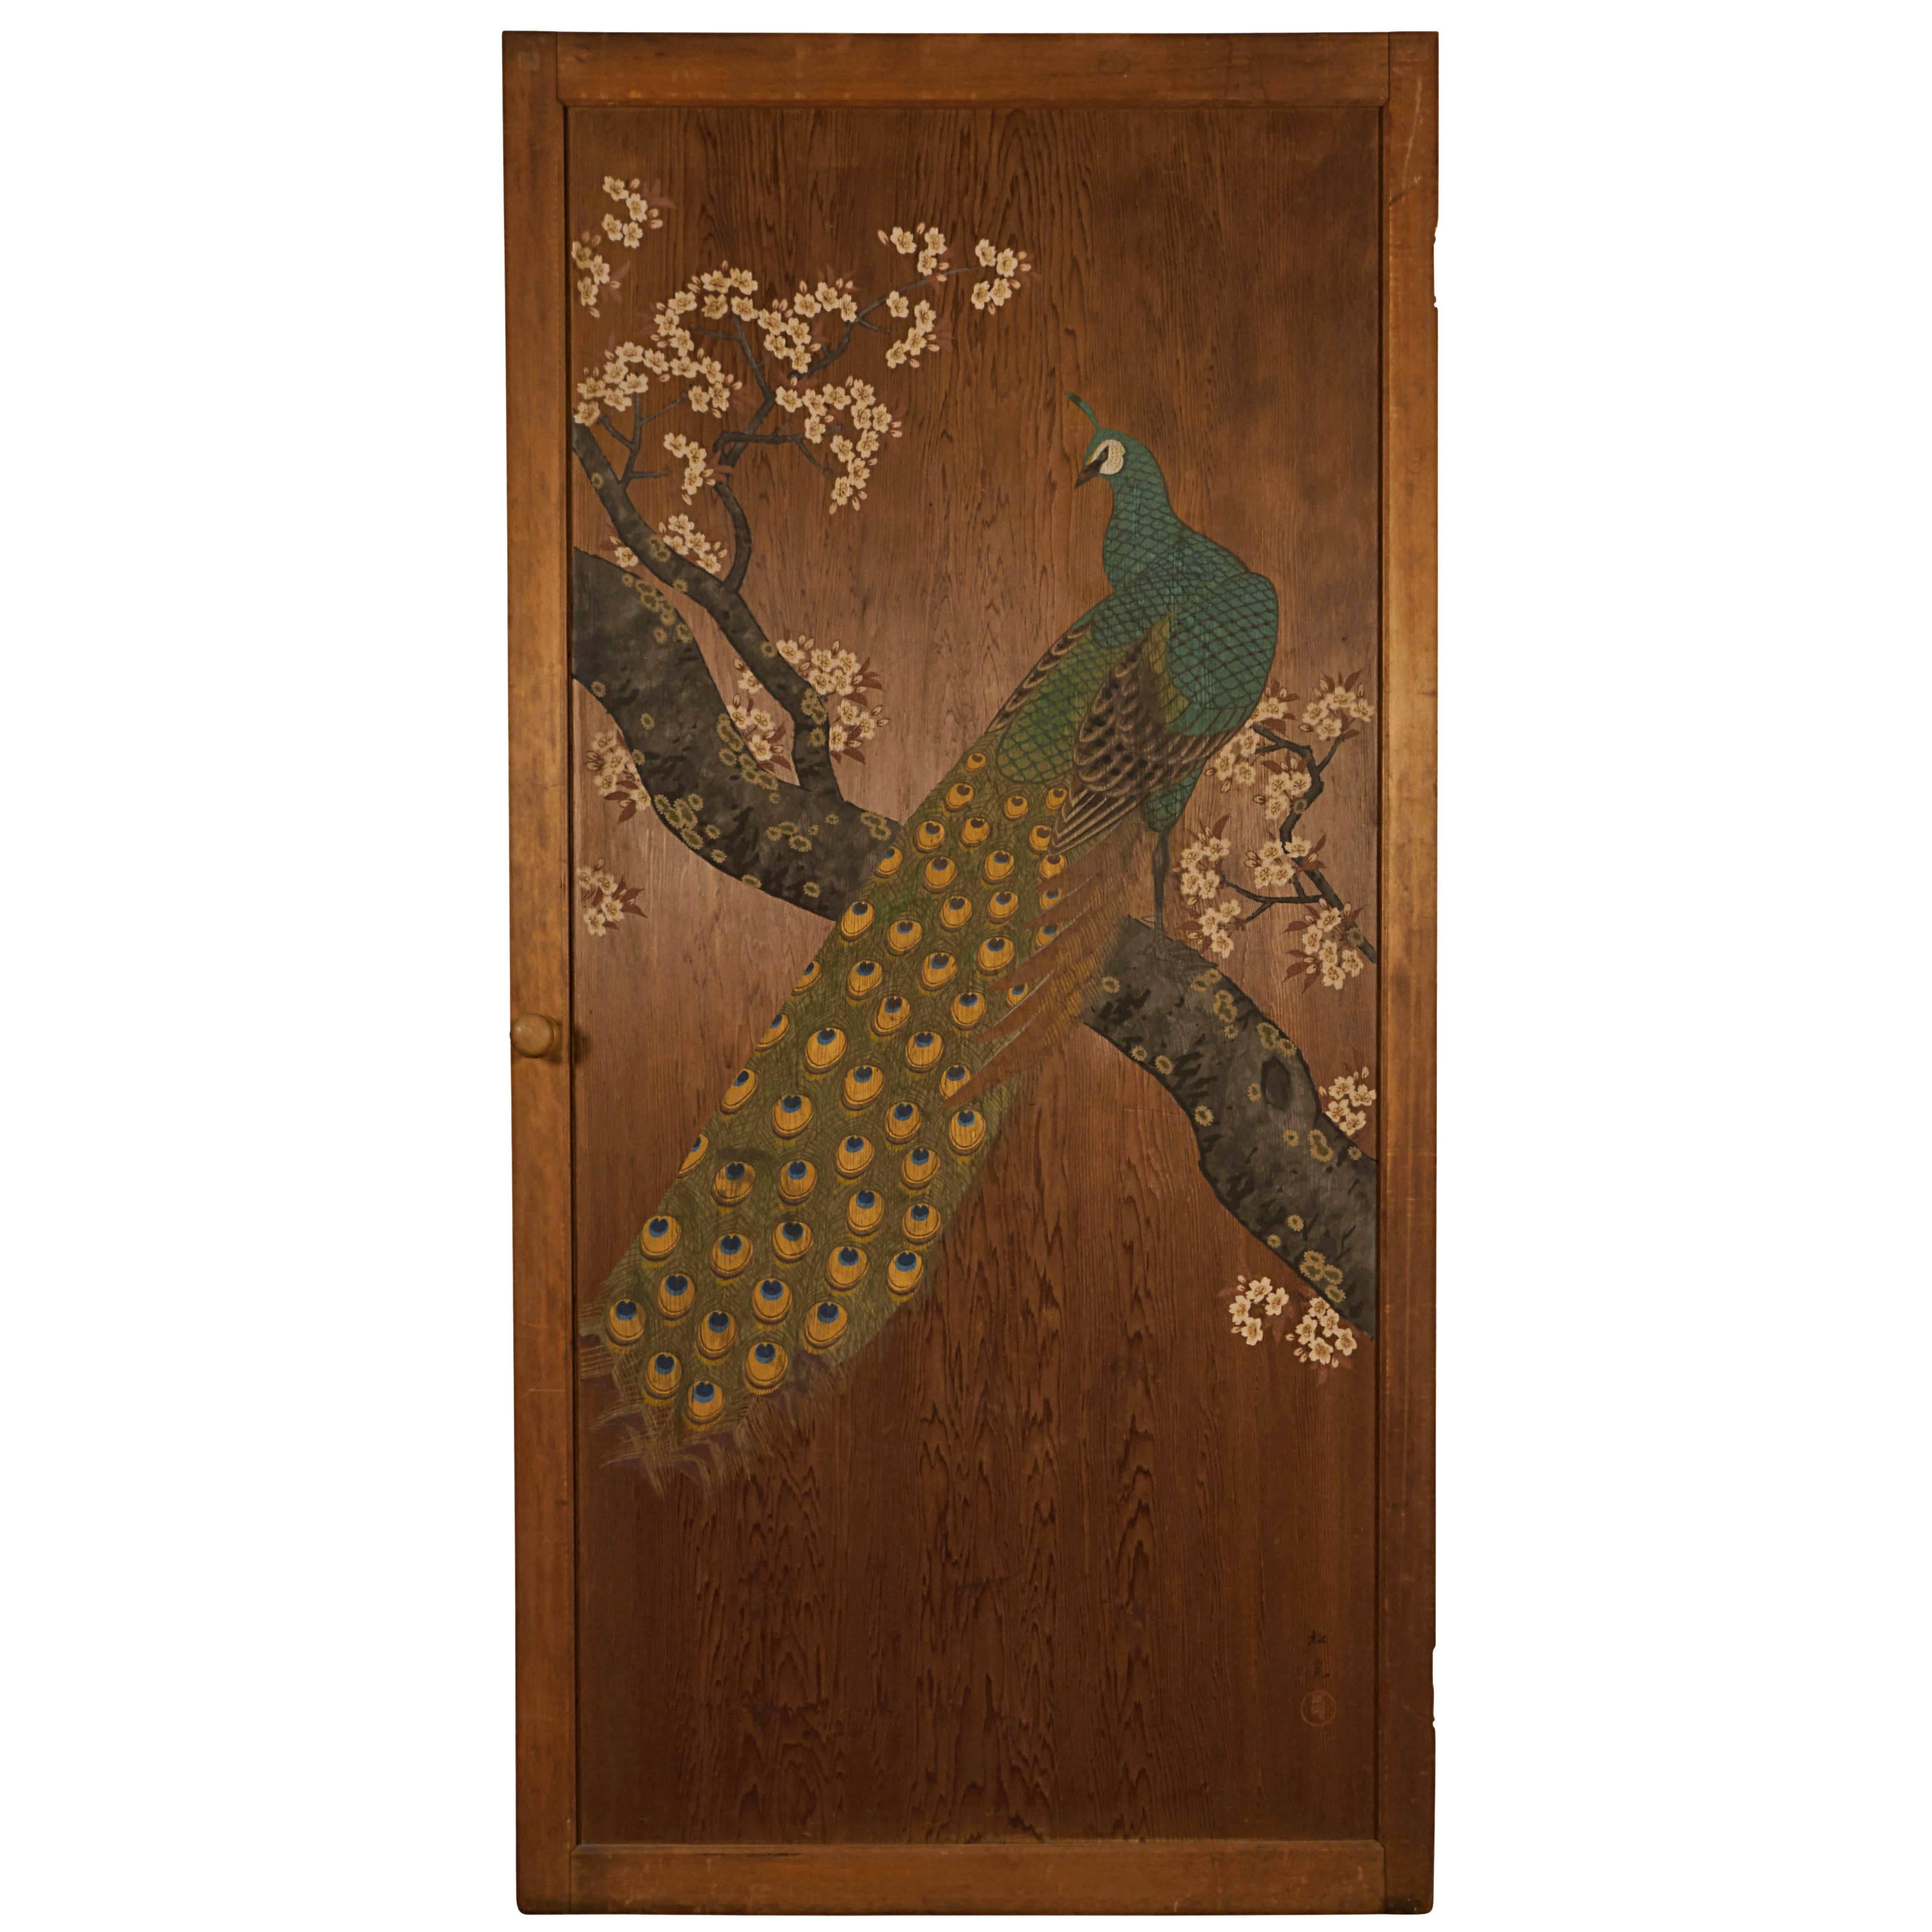 Japanese Door with Peacock Painting, Late 19th-Early 20th Century